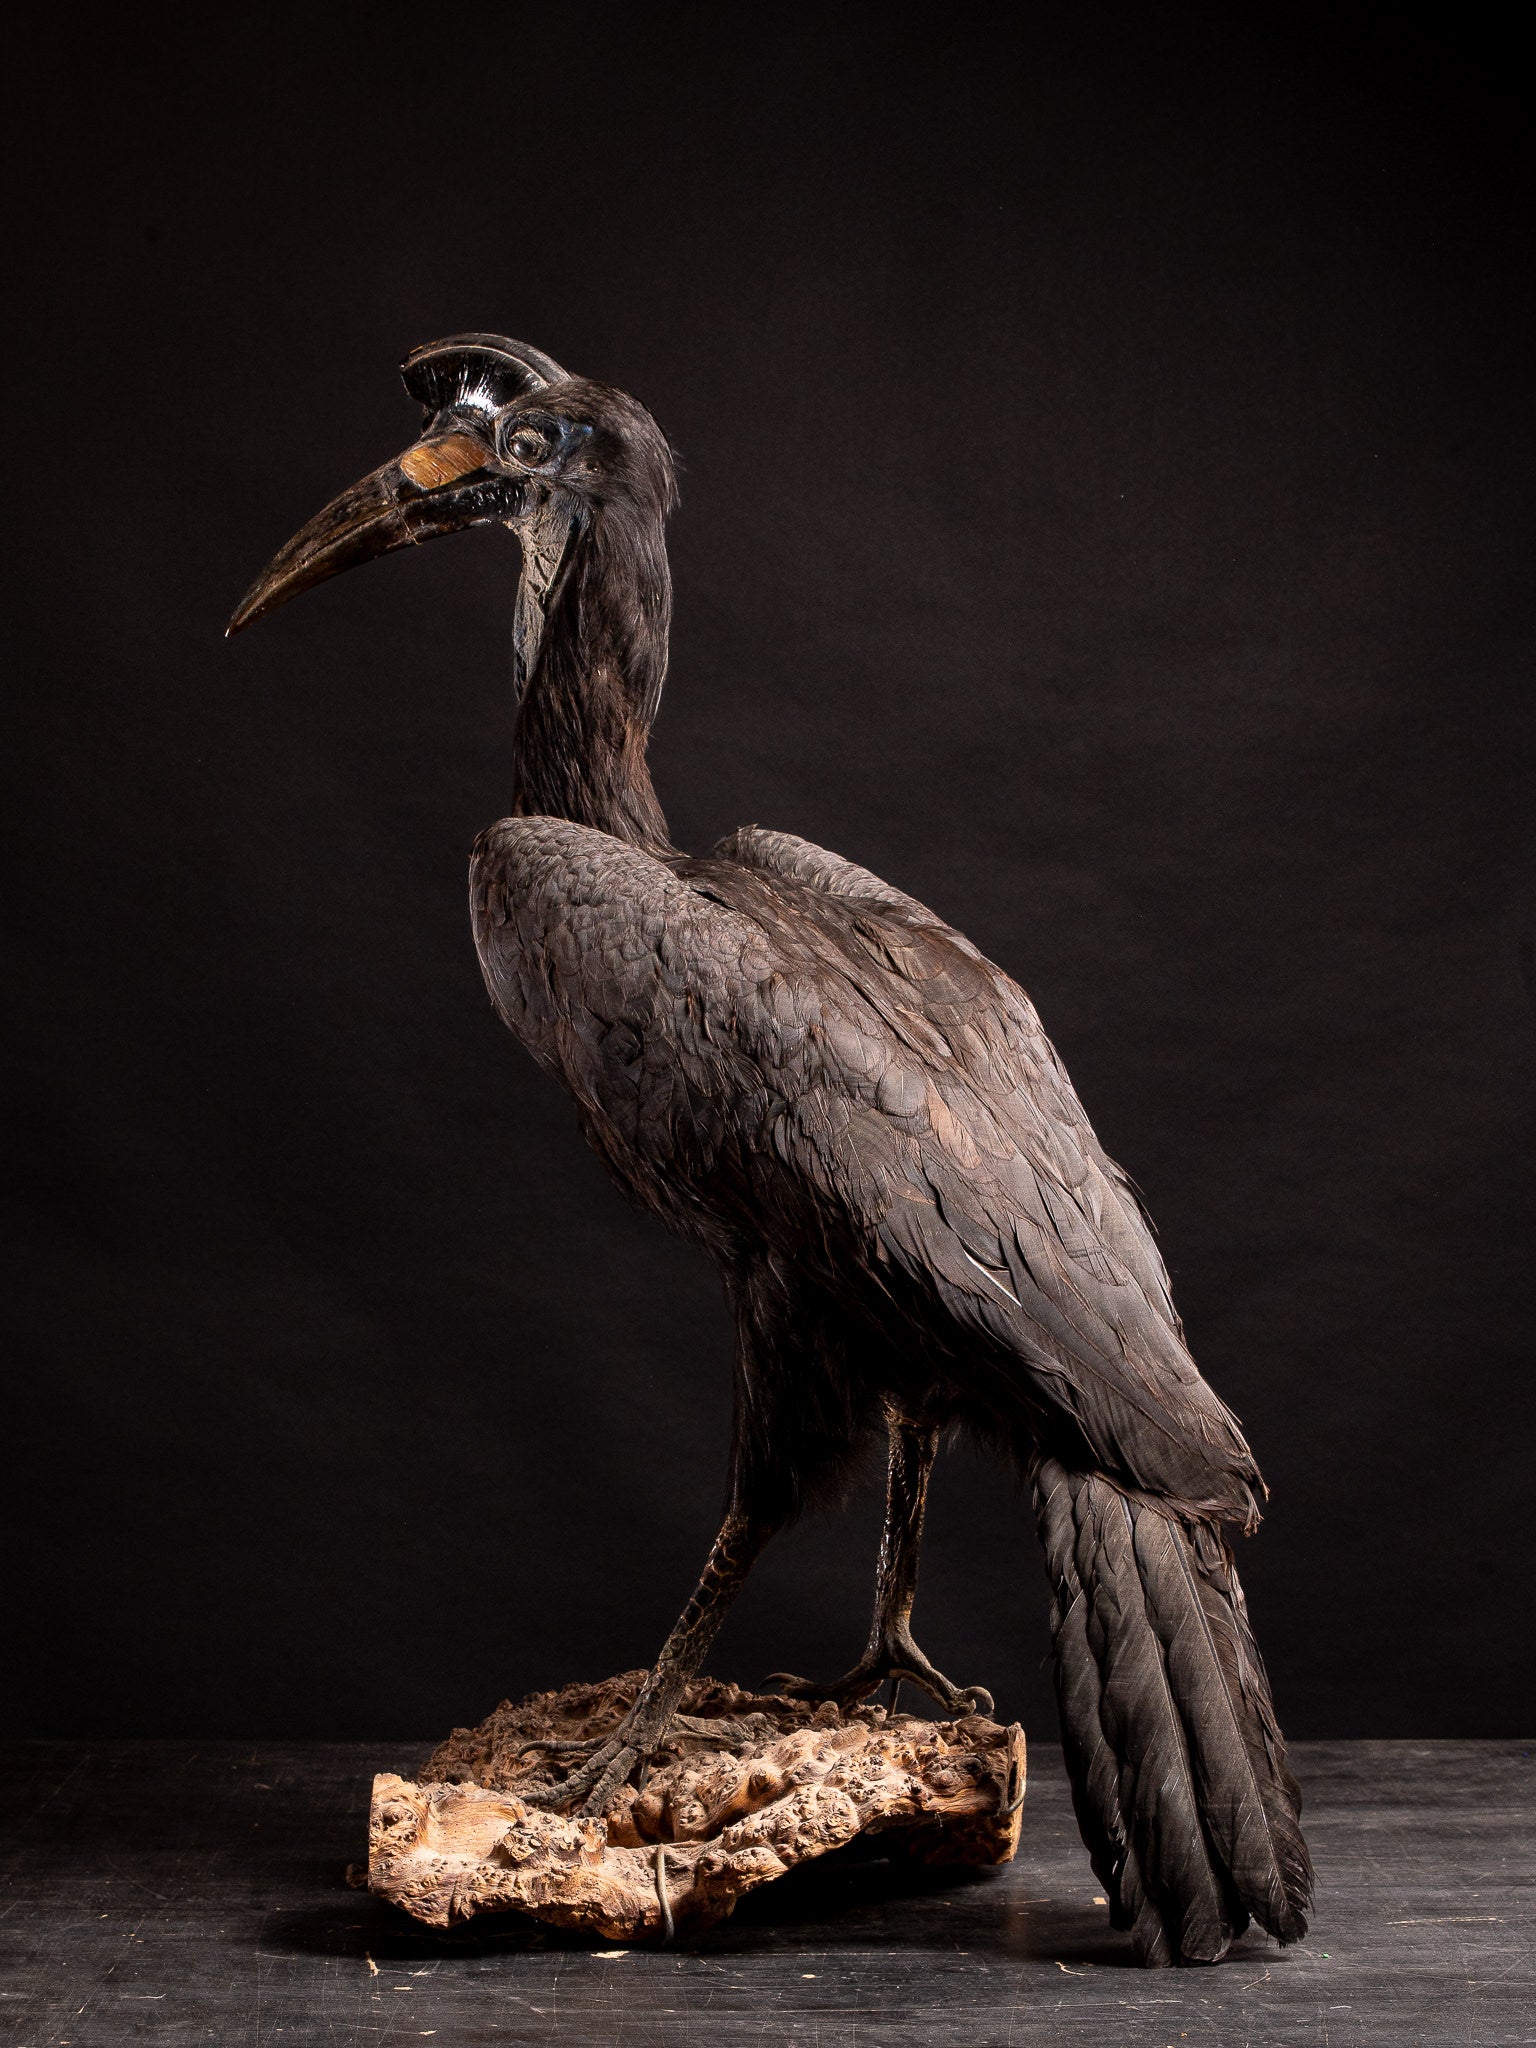 Abyssinian Ground Hornbill taxidermy on a Natural base-Bucorvus abyssinicus (Cites NL)

Provenance: Private collection Brussels

The Ground Hornbill is a particularly spectacular representative of its avian family. It is a very large hornbill and